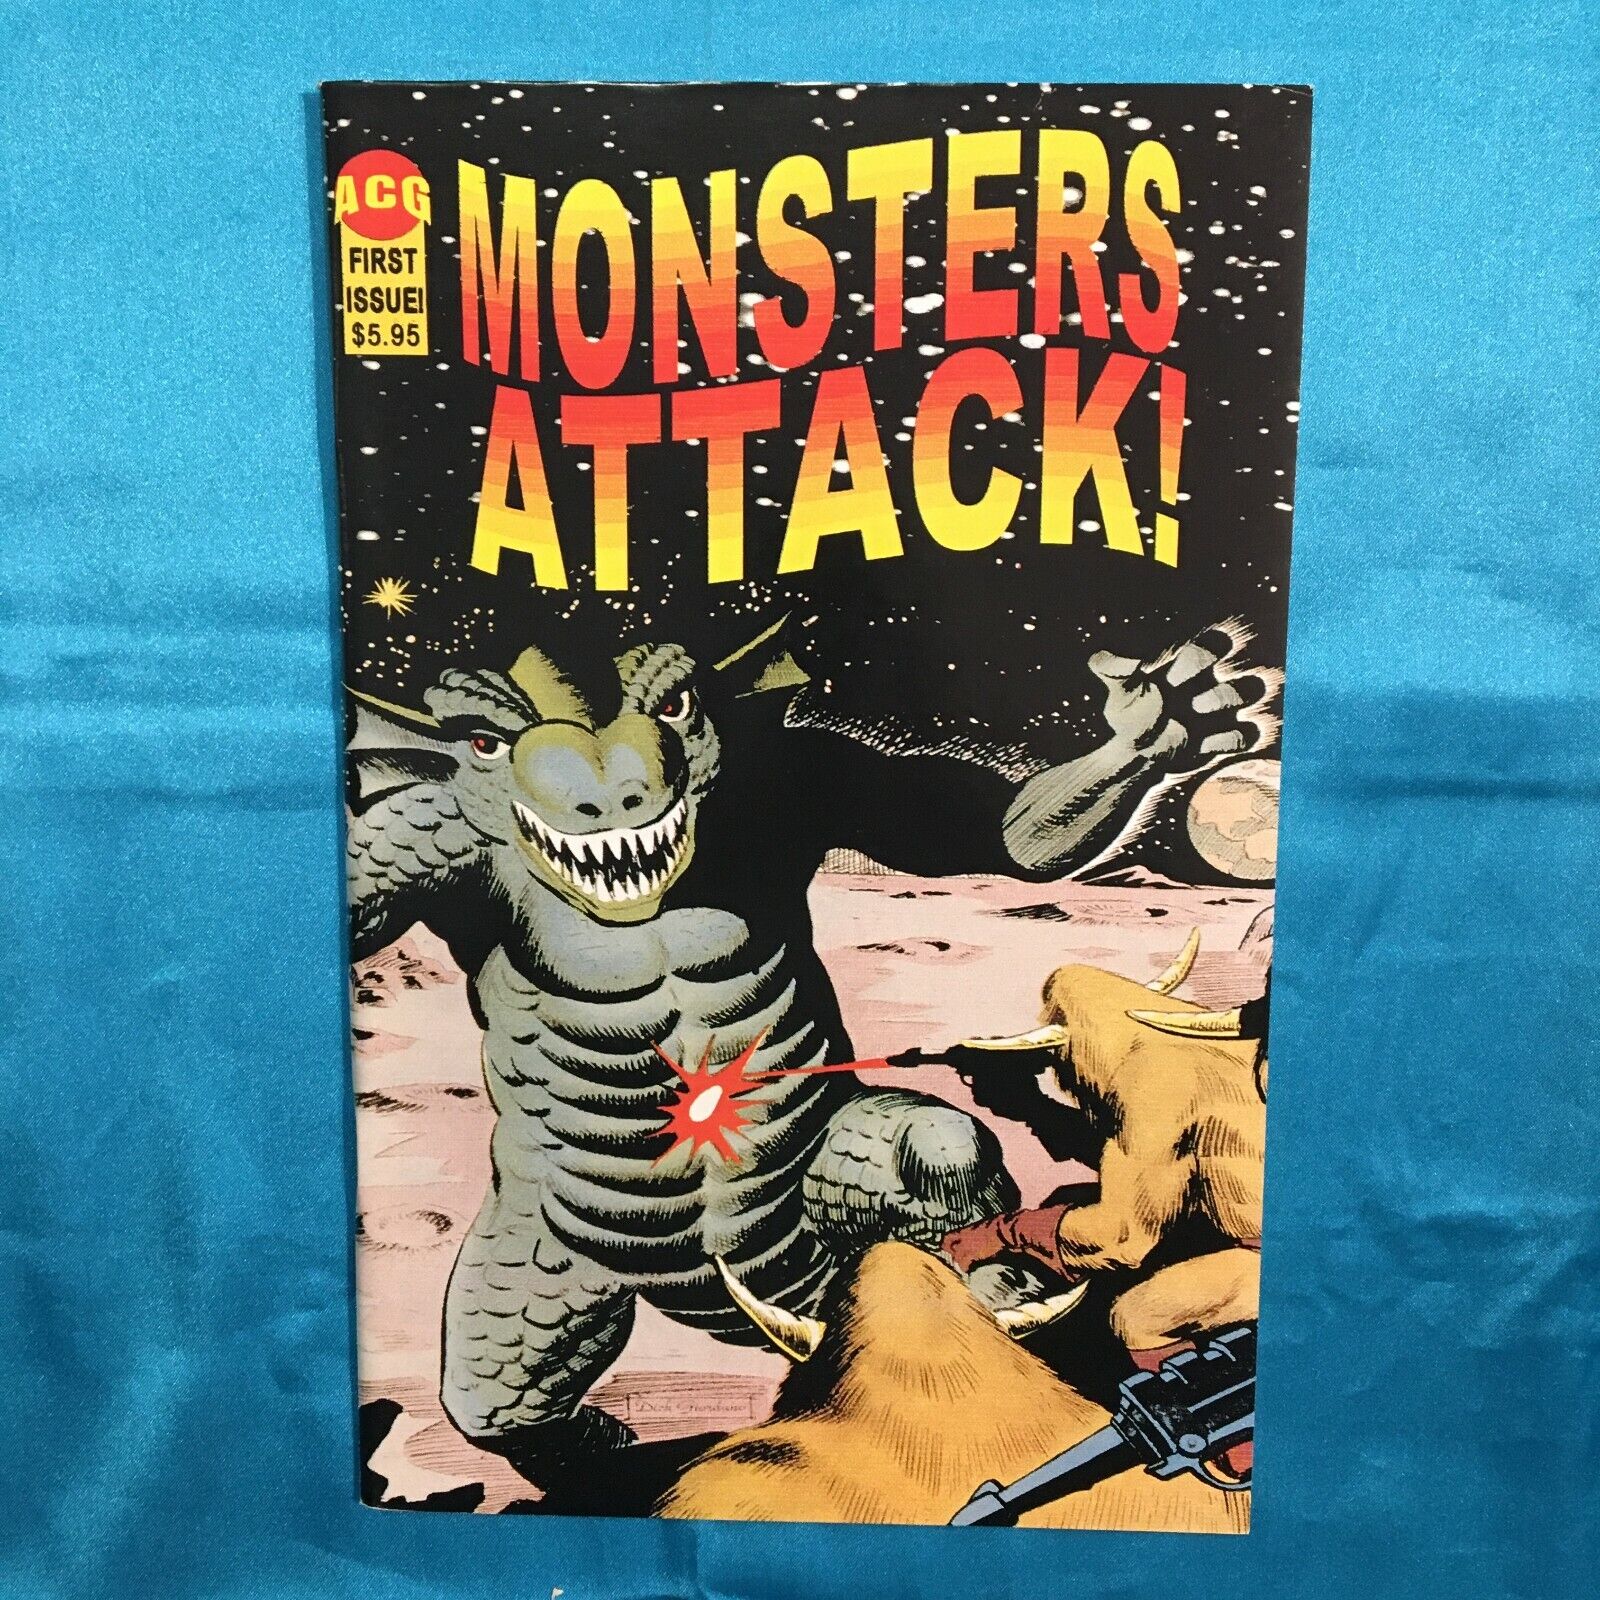 MONSTERS ATTACK # 1, 2002, B & W, STEVE DITKO ART VERY FINE MINUS CONDITION